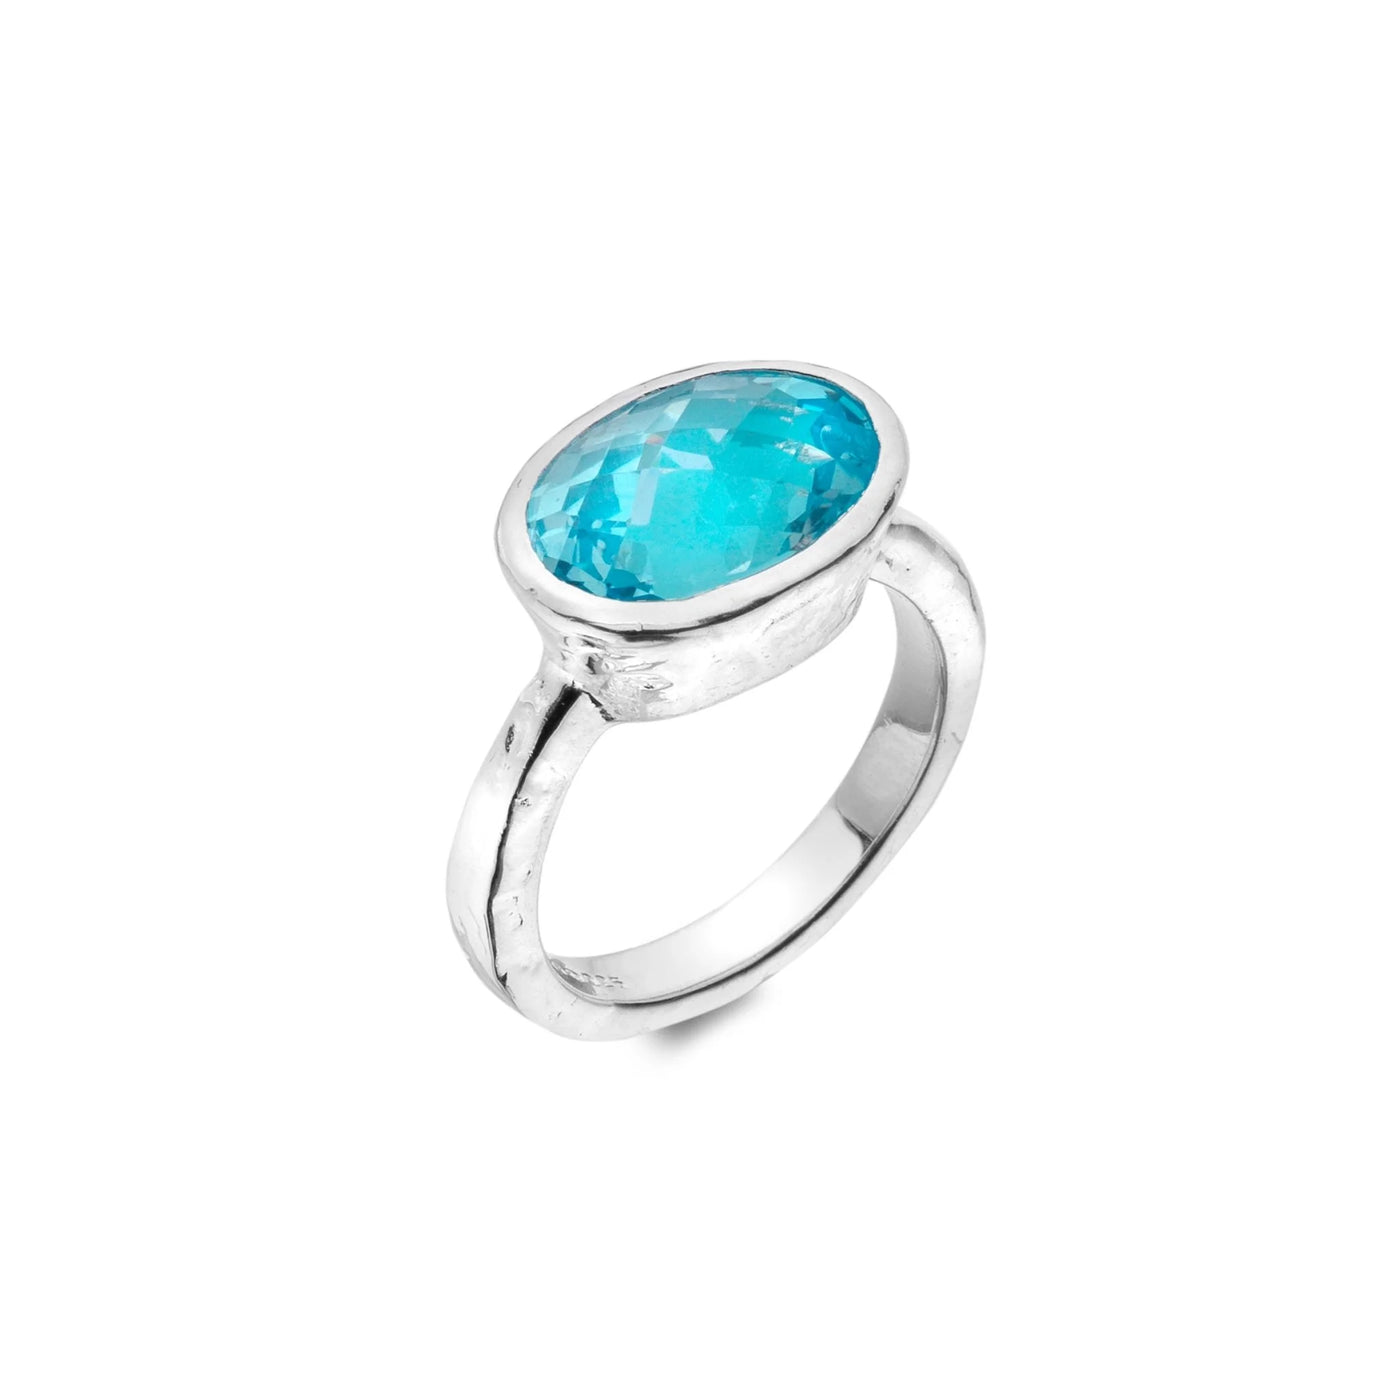 Sea Gems Silver Oval Faceted Blue Topaz Ring